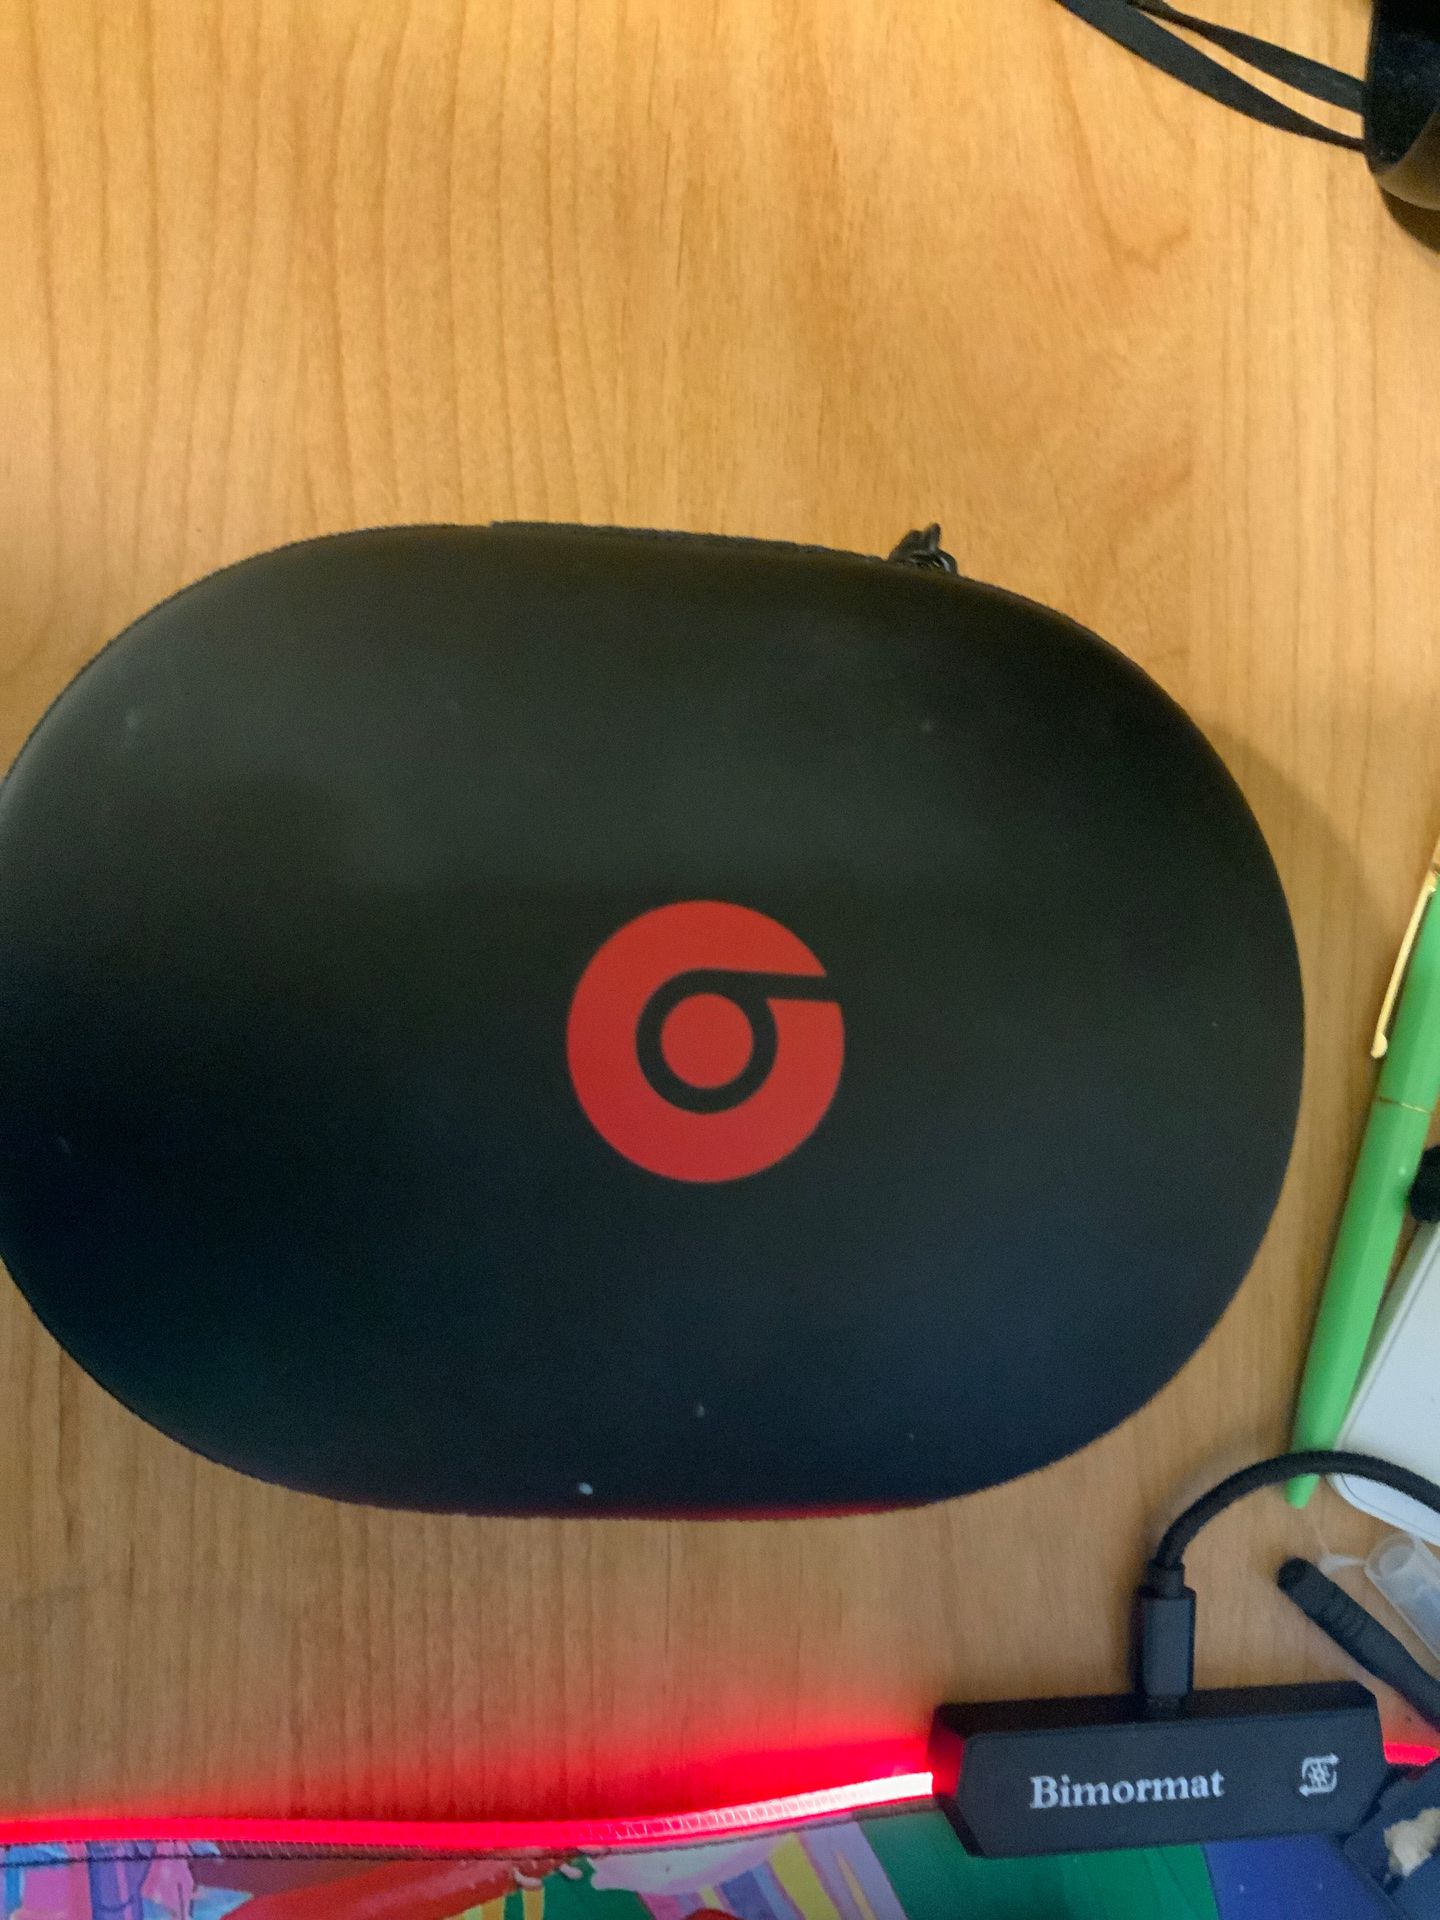 Beats Wired Headphones (barely ever used) works perfectly fine